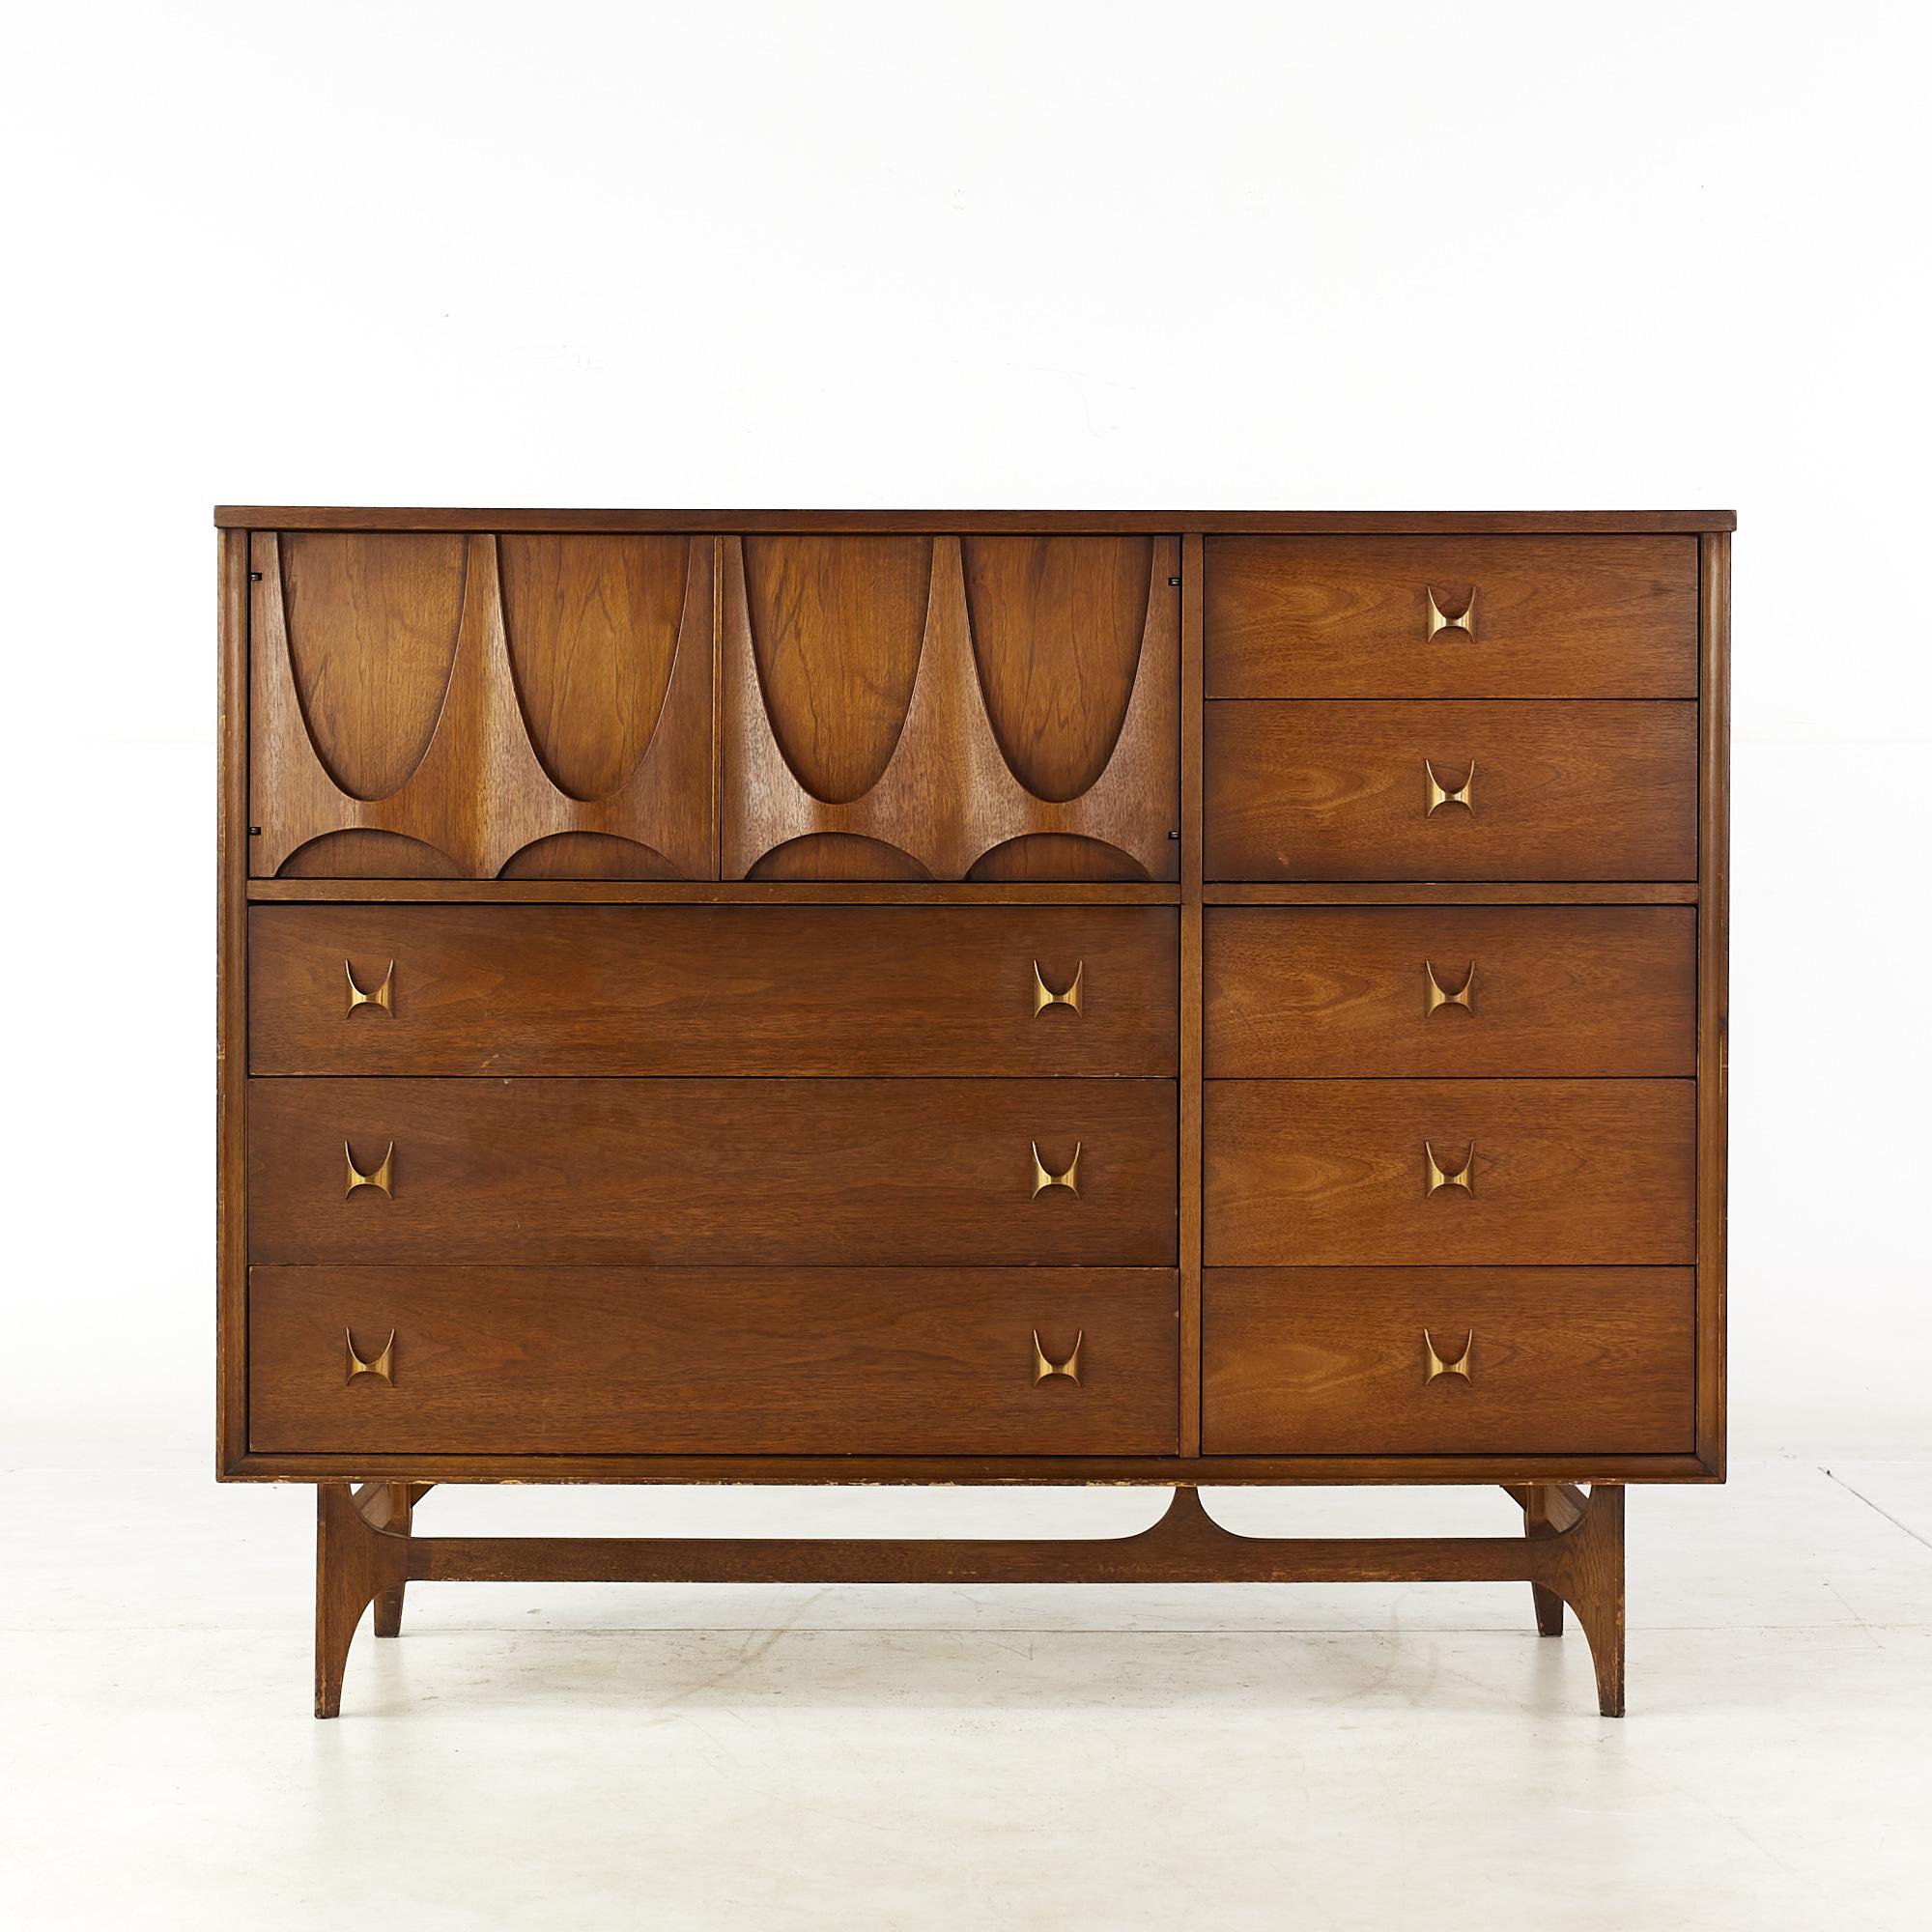 Broyhill Brasilia Mid Century Walnut magna dresser

This dresser measures: 54 wide x 19 deep x 43.25 inches high

All pieces of furniture can be had in what we call restored vintage condition. That means the piece is restored upon purchase so